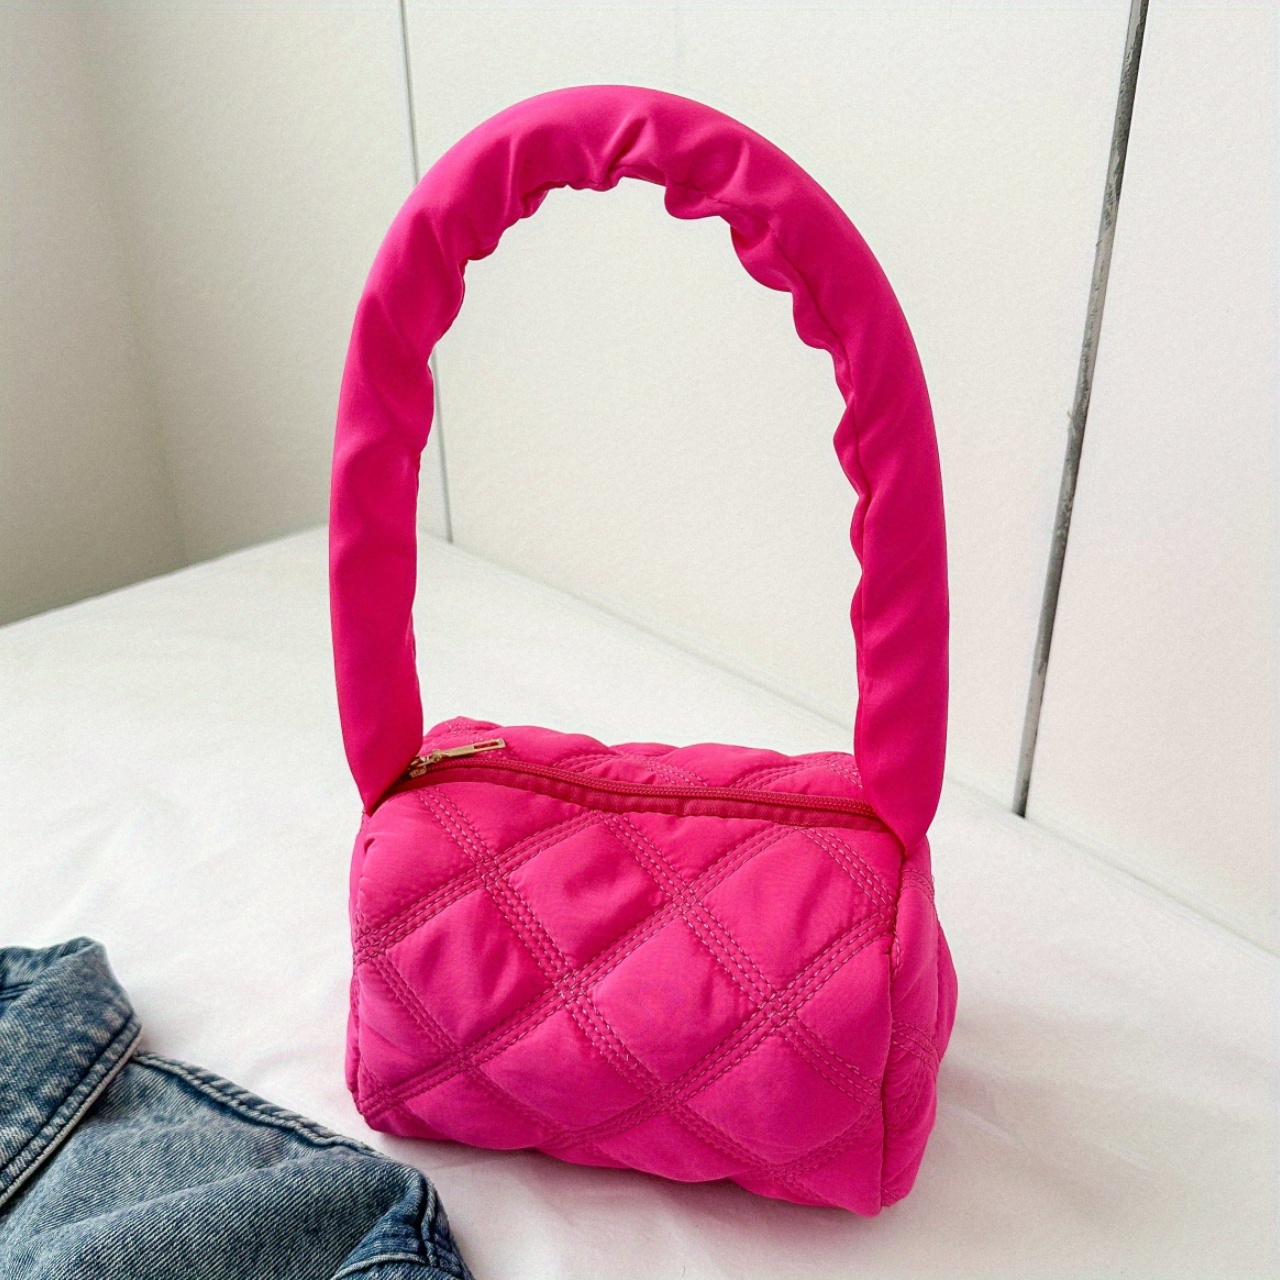 Chanel bag-Buy chanel bag on AliExpress for free shipping!